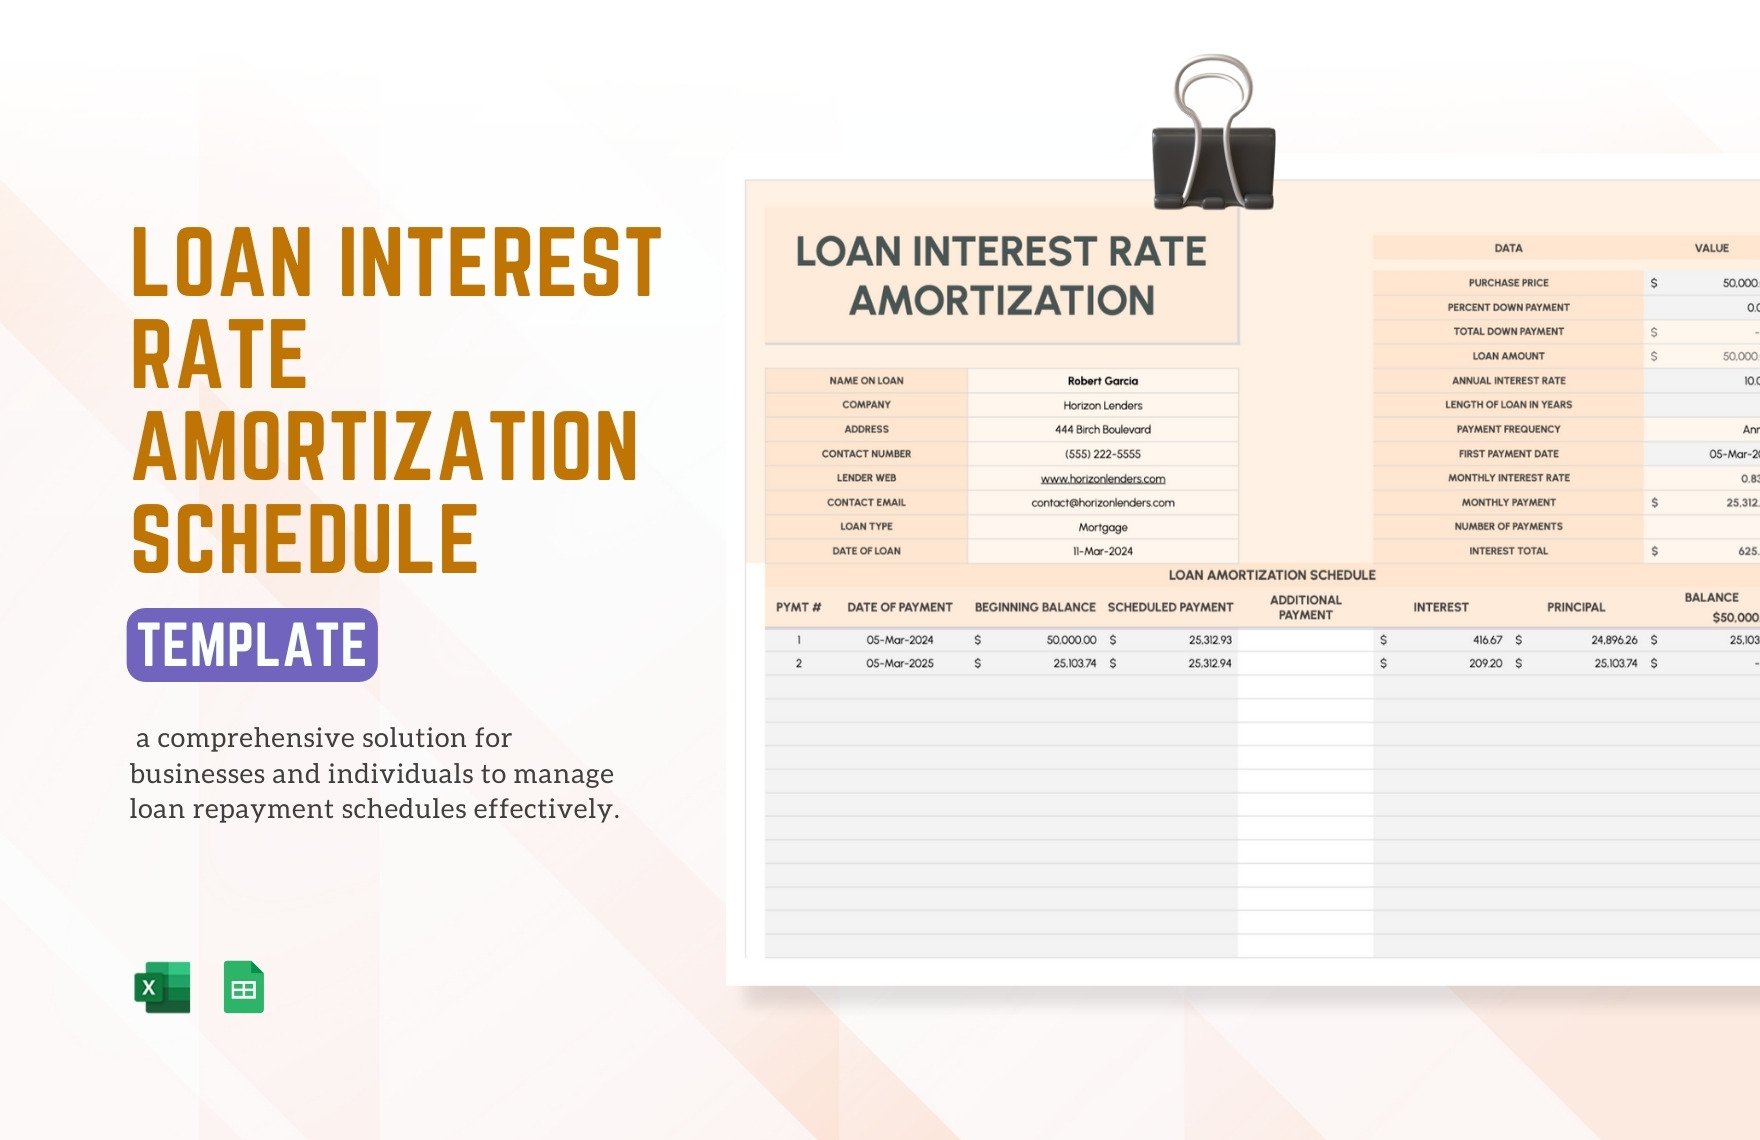 Loan Interest Rate Amortization Schedule Template in Excel, Google Sheets